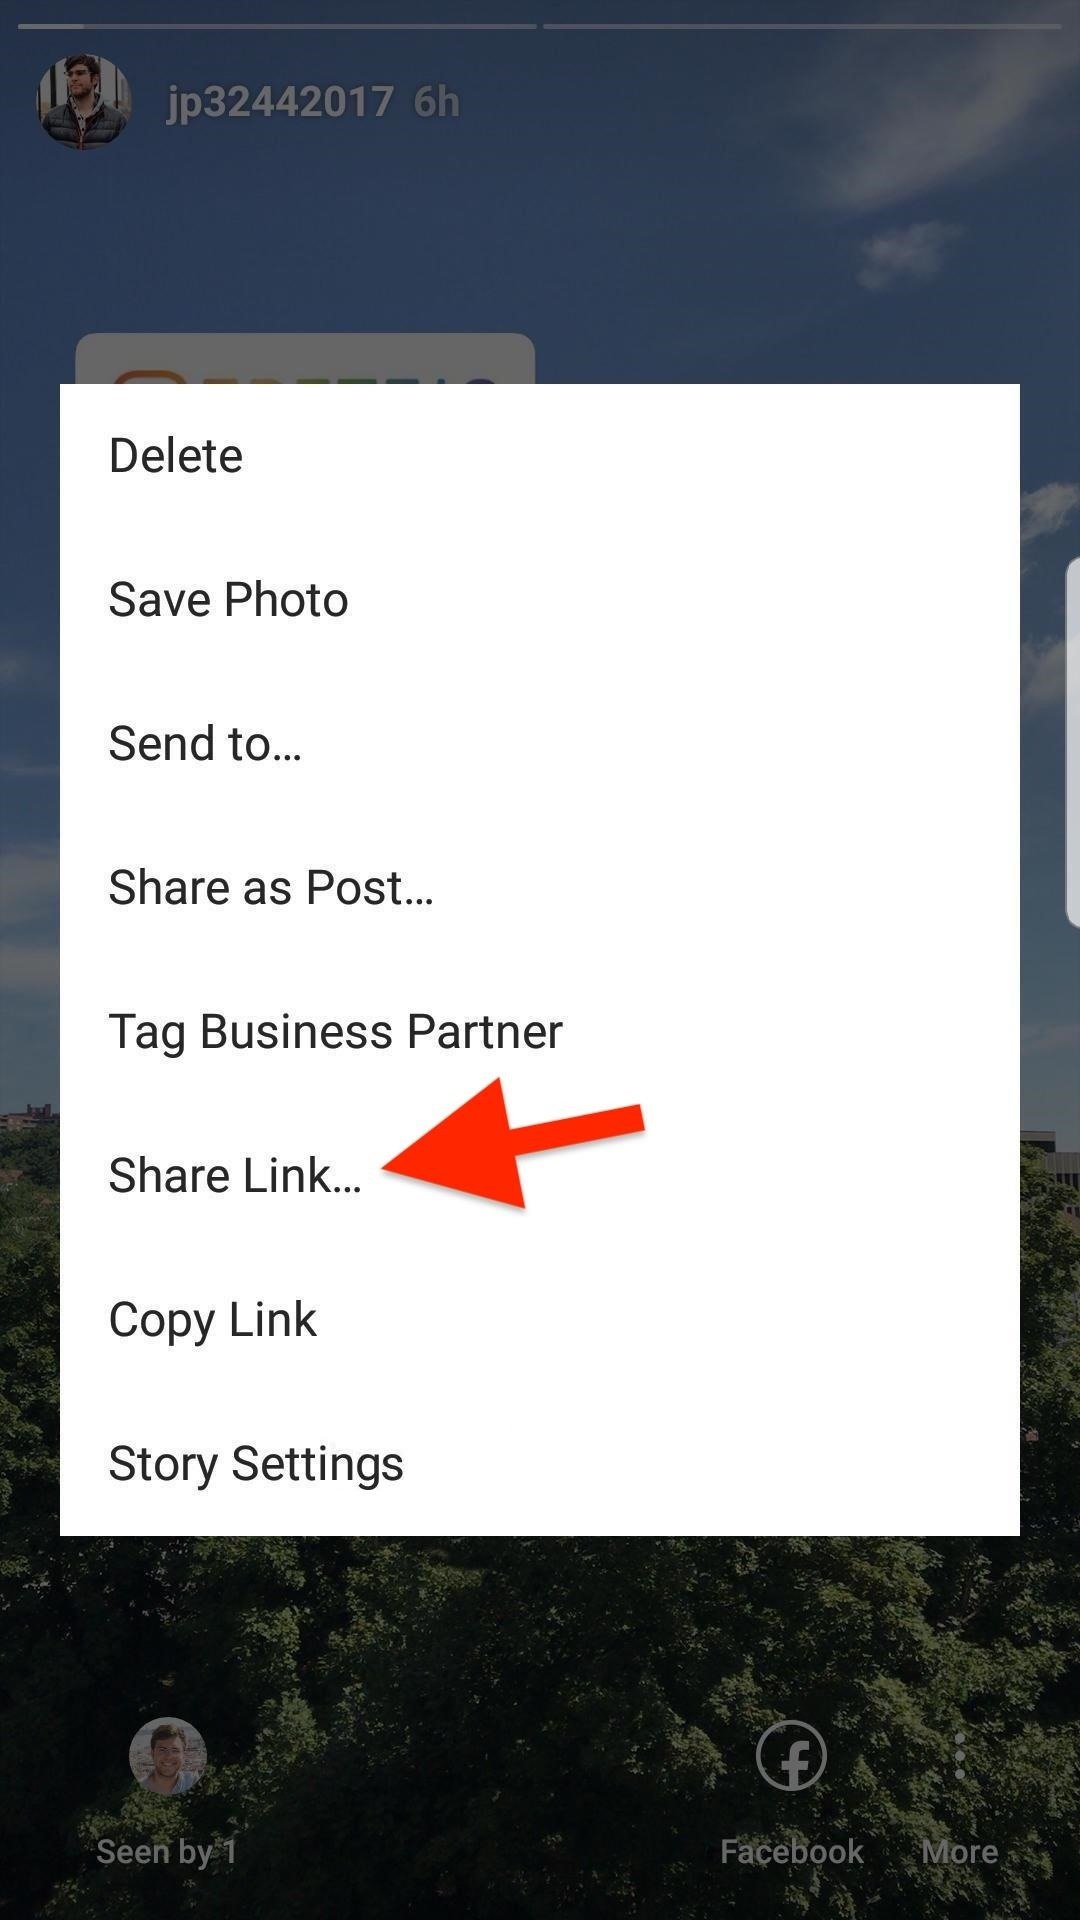 How to Copy & Share a Link to Your Instagram Story That You Can Post Anywhere